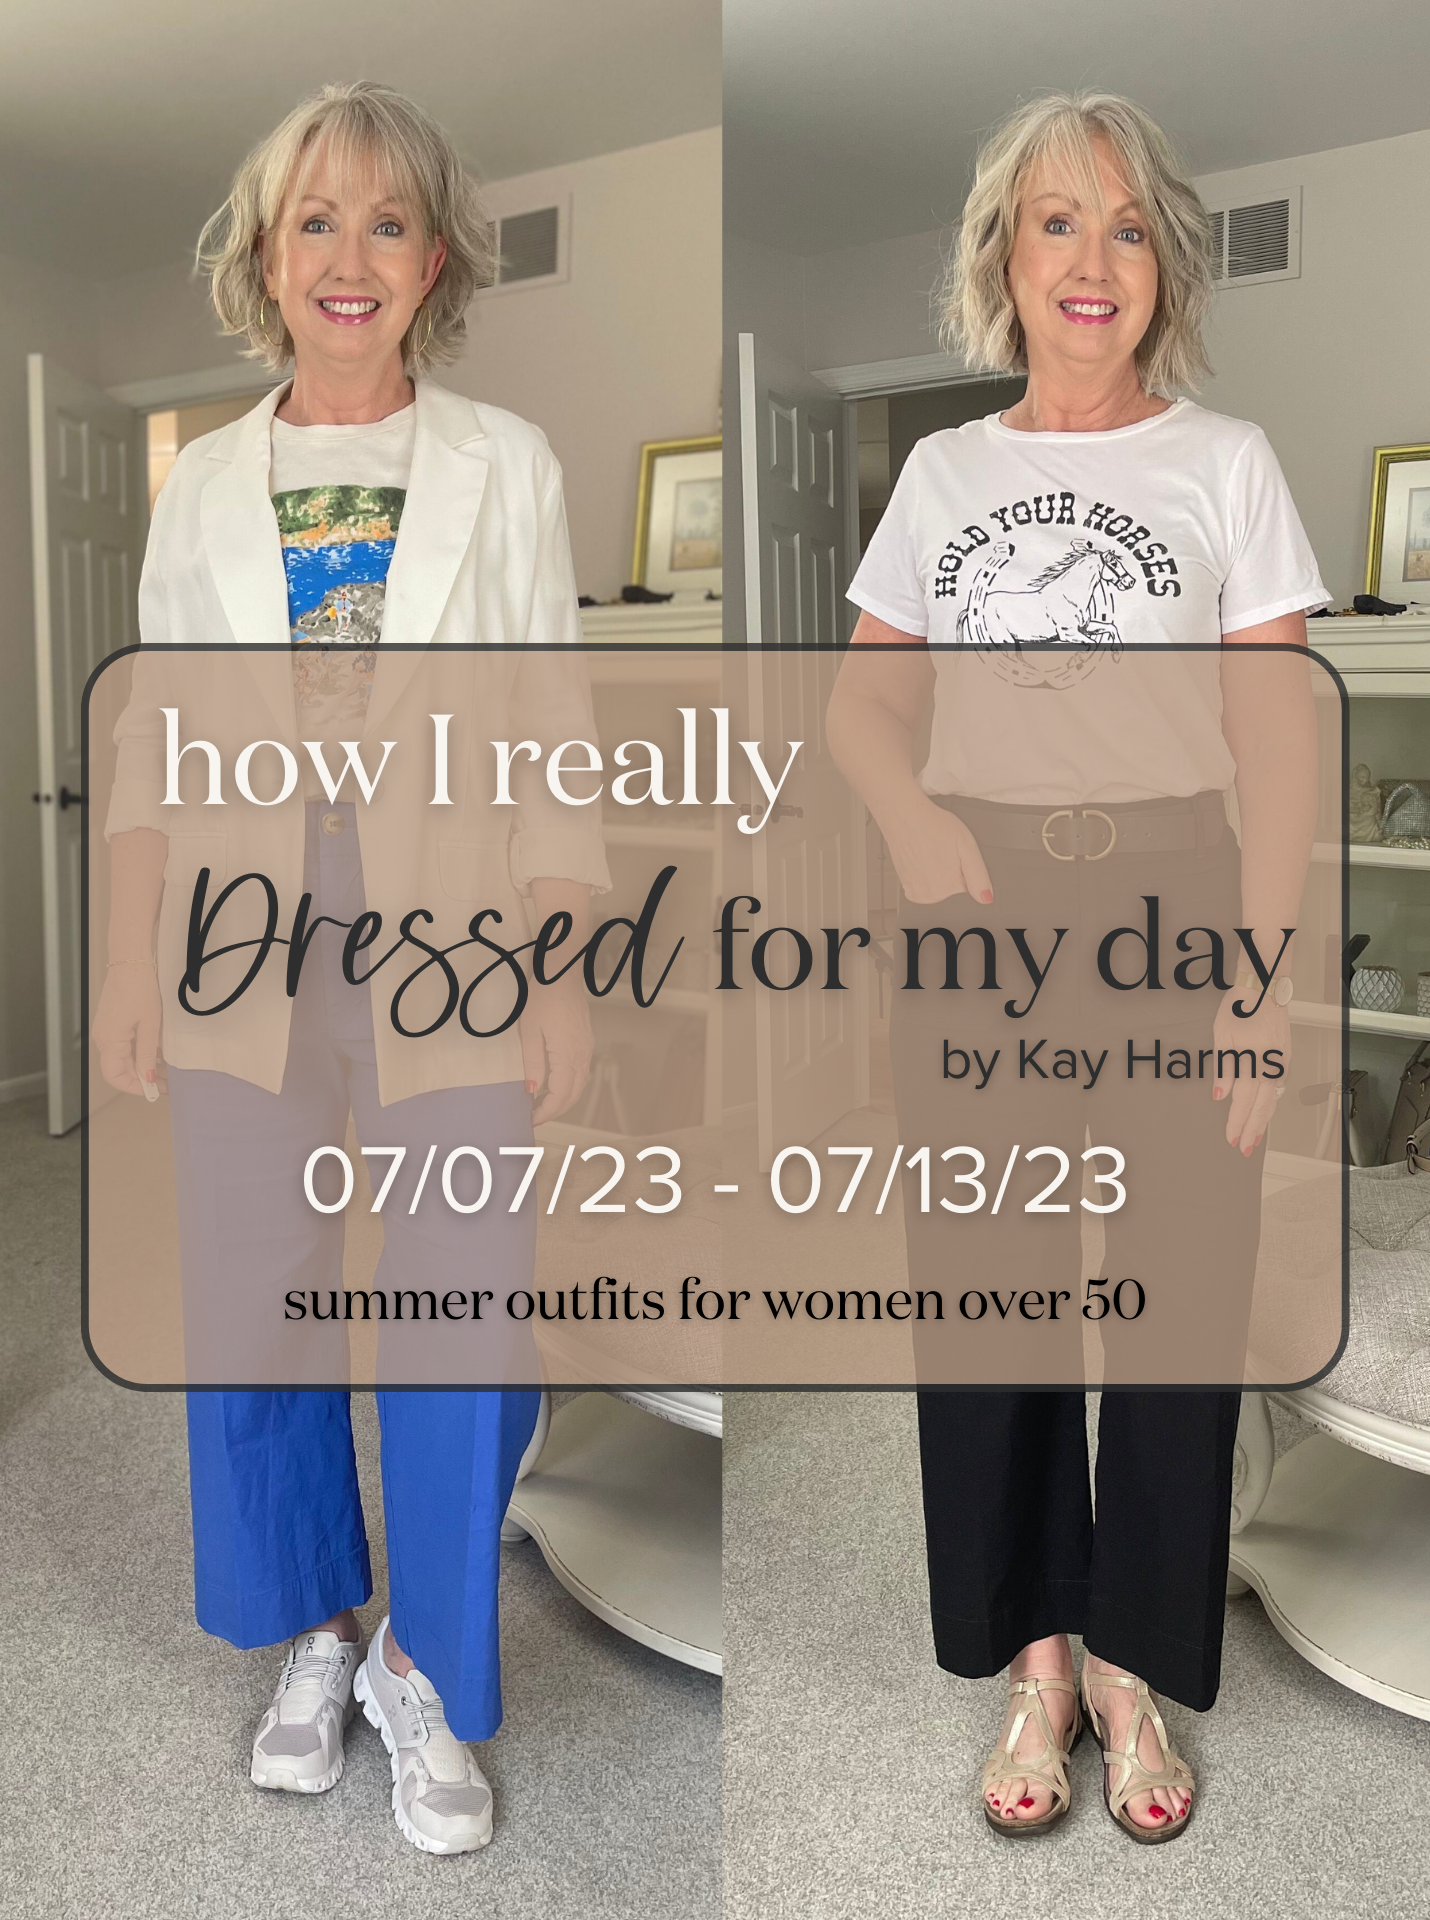 How to dress comfy and not frumpy for women over 50